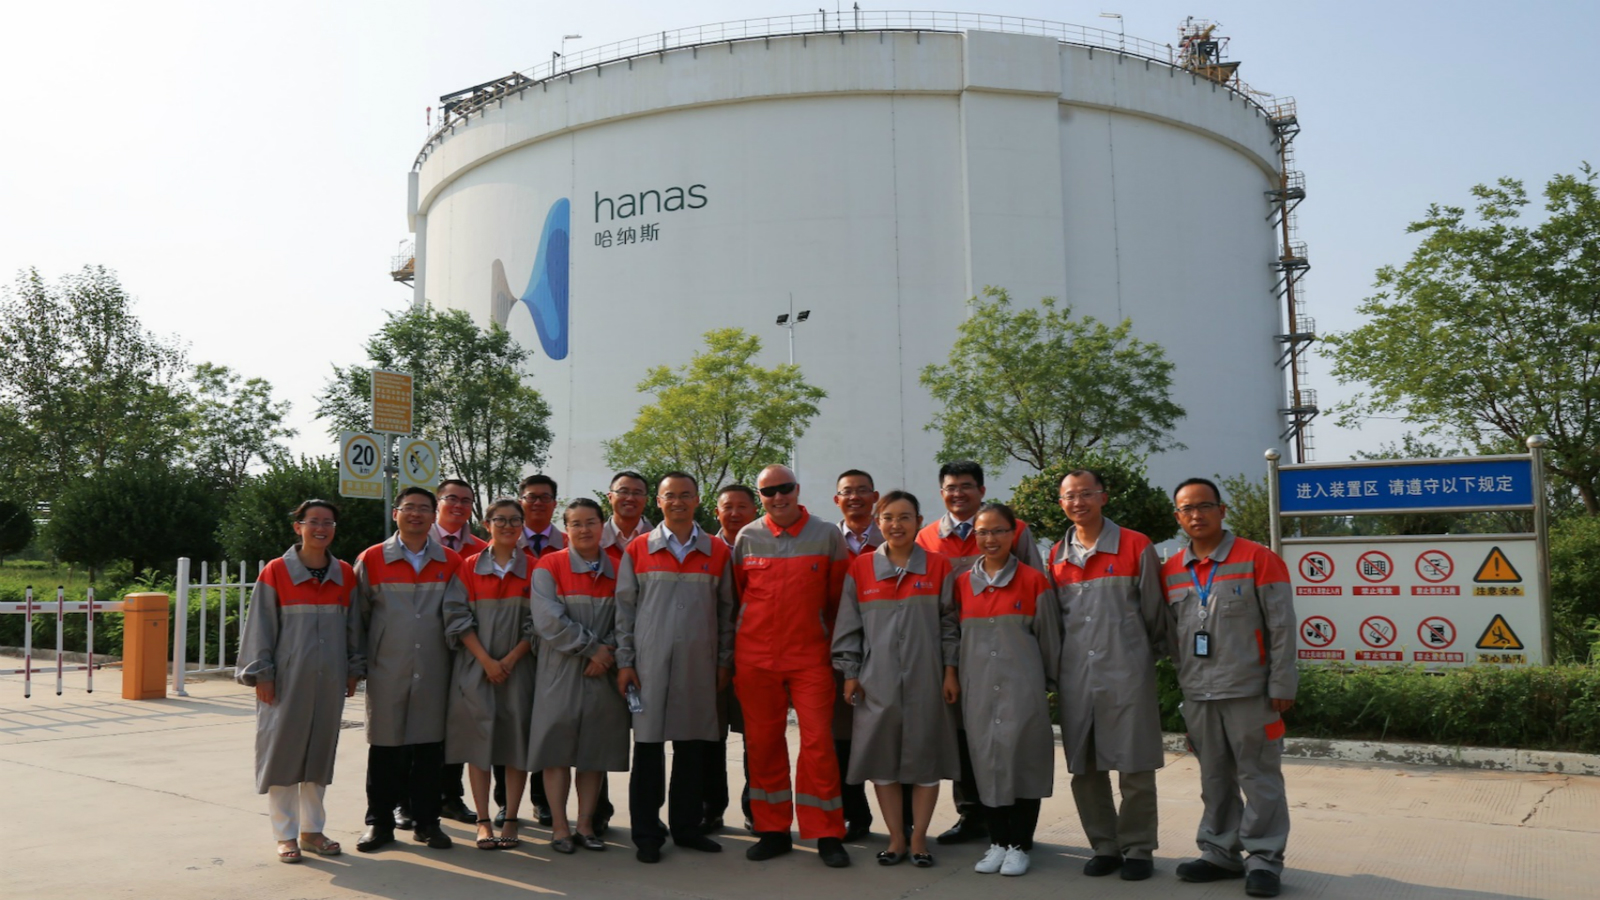 Investigation and Research on Hanas by Leadership Group of National Development Bank, Ningxia branch